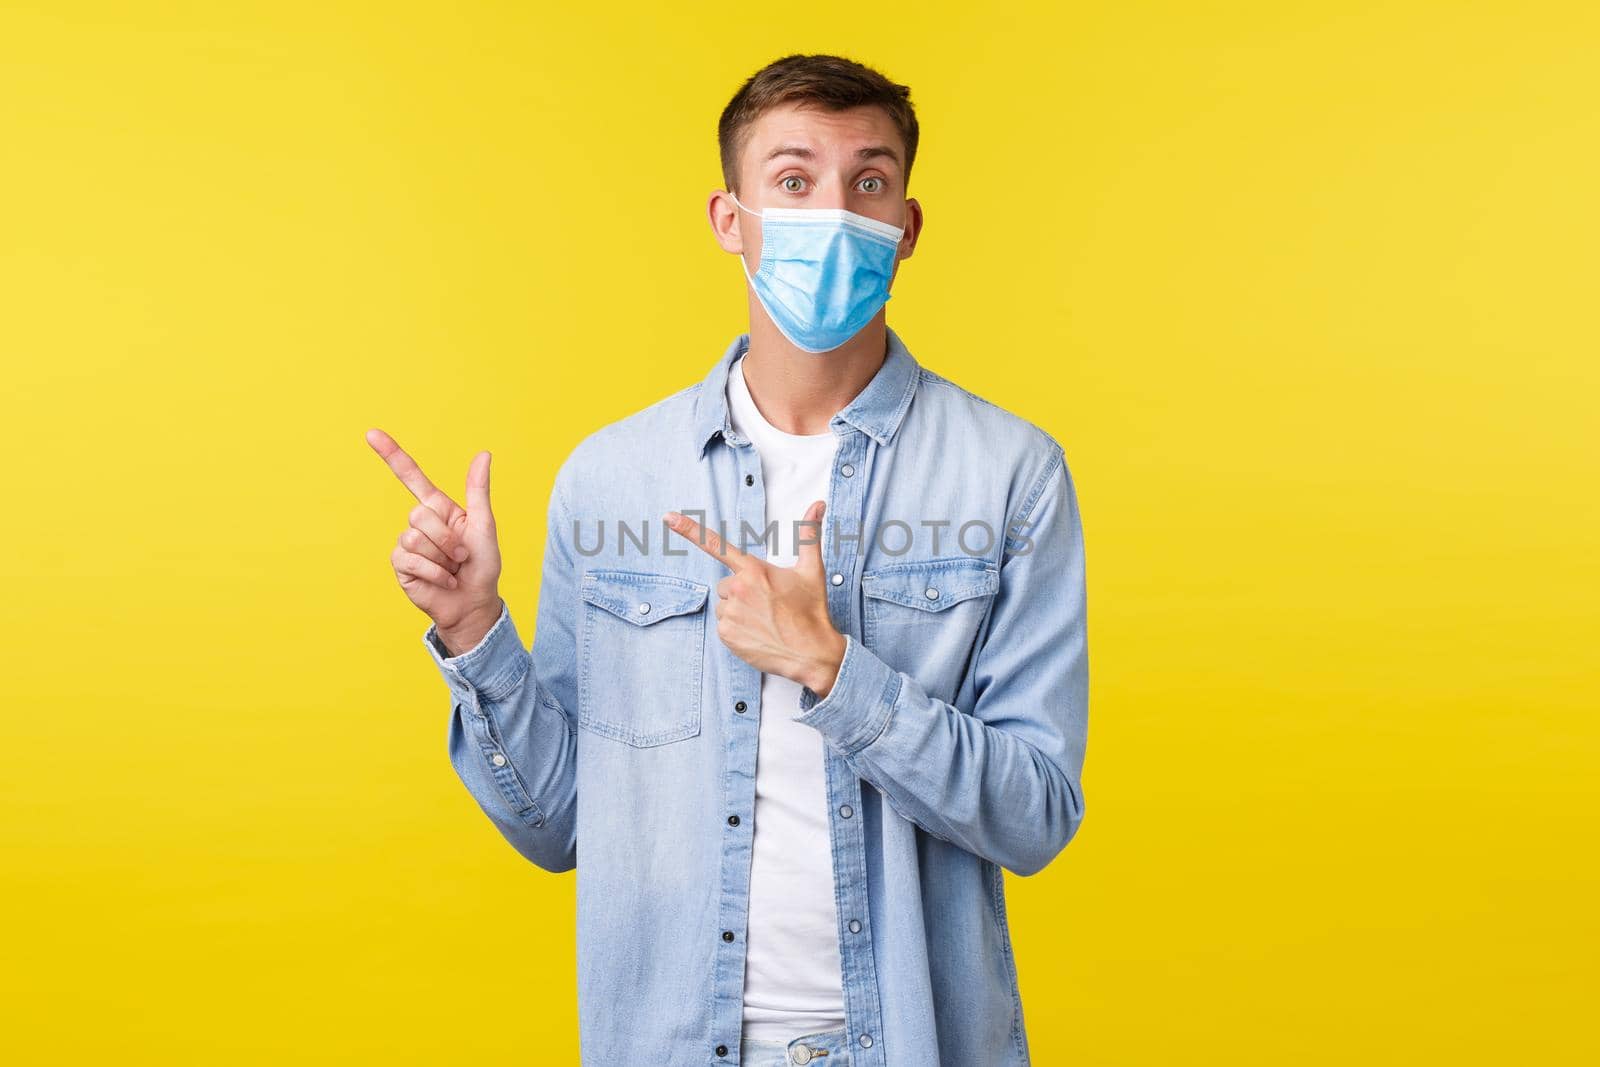 Concept of covid-19 pandemic outbreak, lifestyle during coronavirus social distancing. Excited handsome man in medical mask provide information on quarantine, pointing upper left corner.